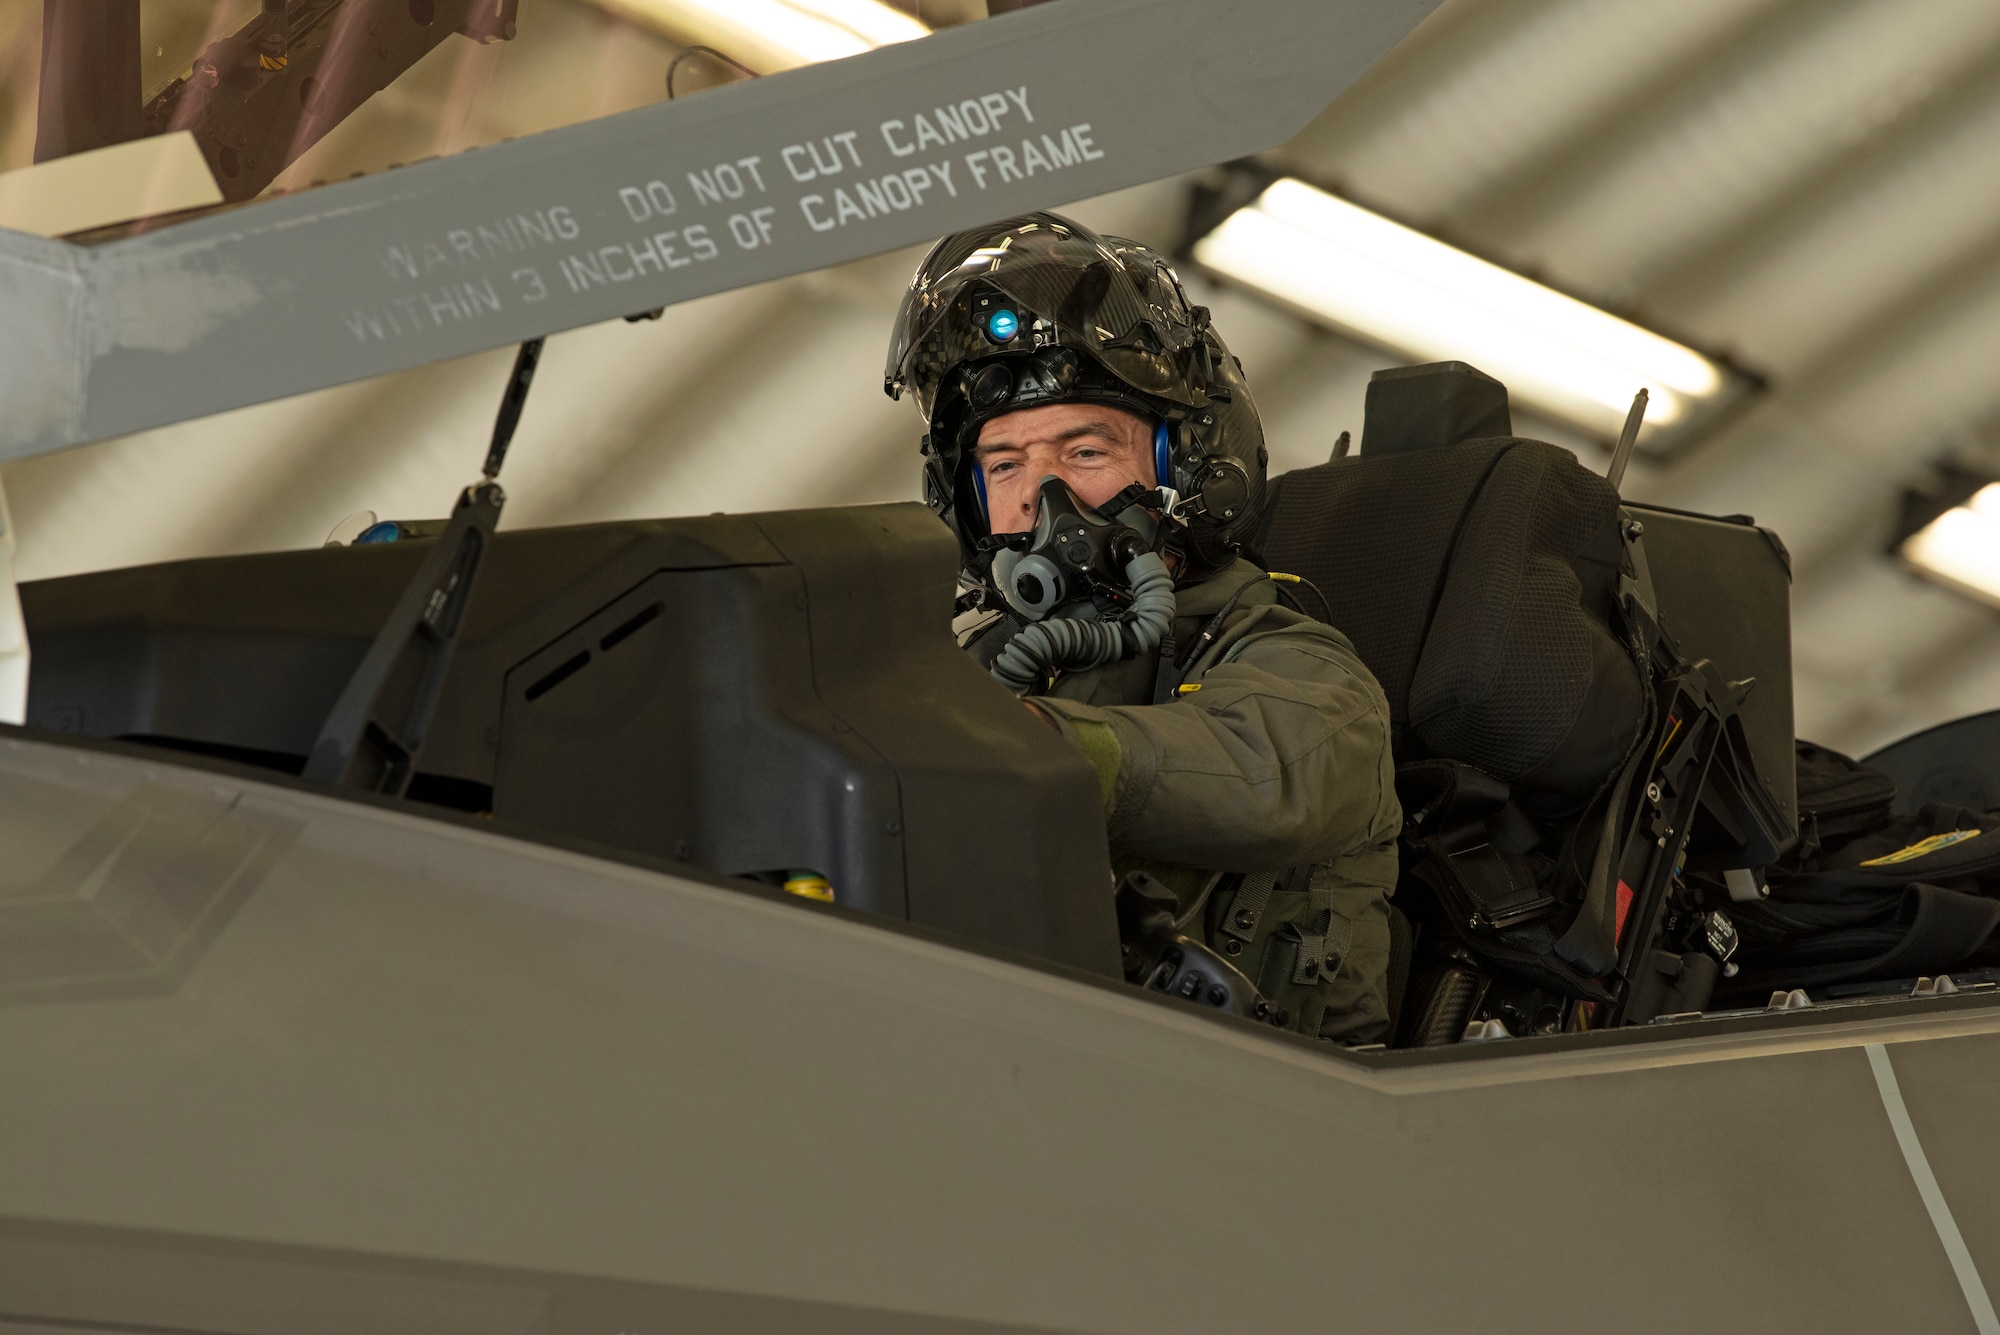 U.S. Air Force Lt. Col. Christopher White, 315th Fighter Squadron commander, currently deployed to Spangdahlem Air Base, Germany, prepares an F-35A Lightning II aircraft for take off, June 3, 2022. Members of the 158th Fighter Wing are in Europe to support NATO’s ongoing air policing mission to deter aggression and assure allies and partners in the region. (U.S. Air Force photo by Tech. Sgt. Anthony Plyler)